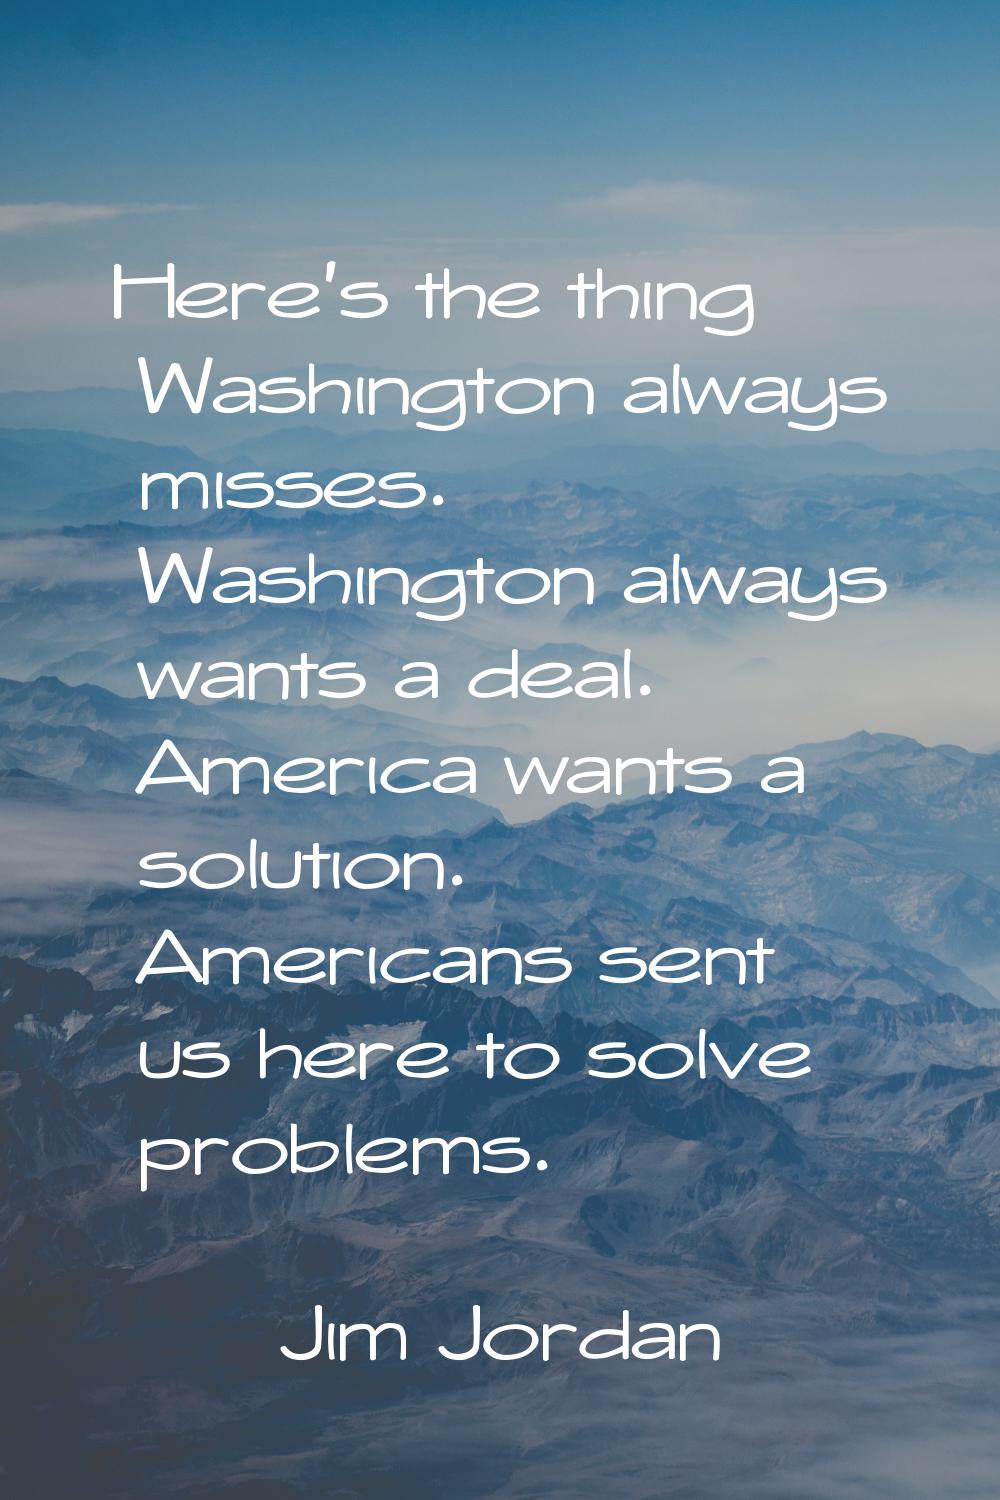 Here's the thing Washington always misses. Washington always wants a deal. America wants a solution